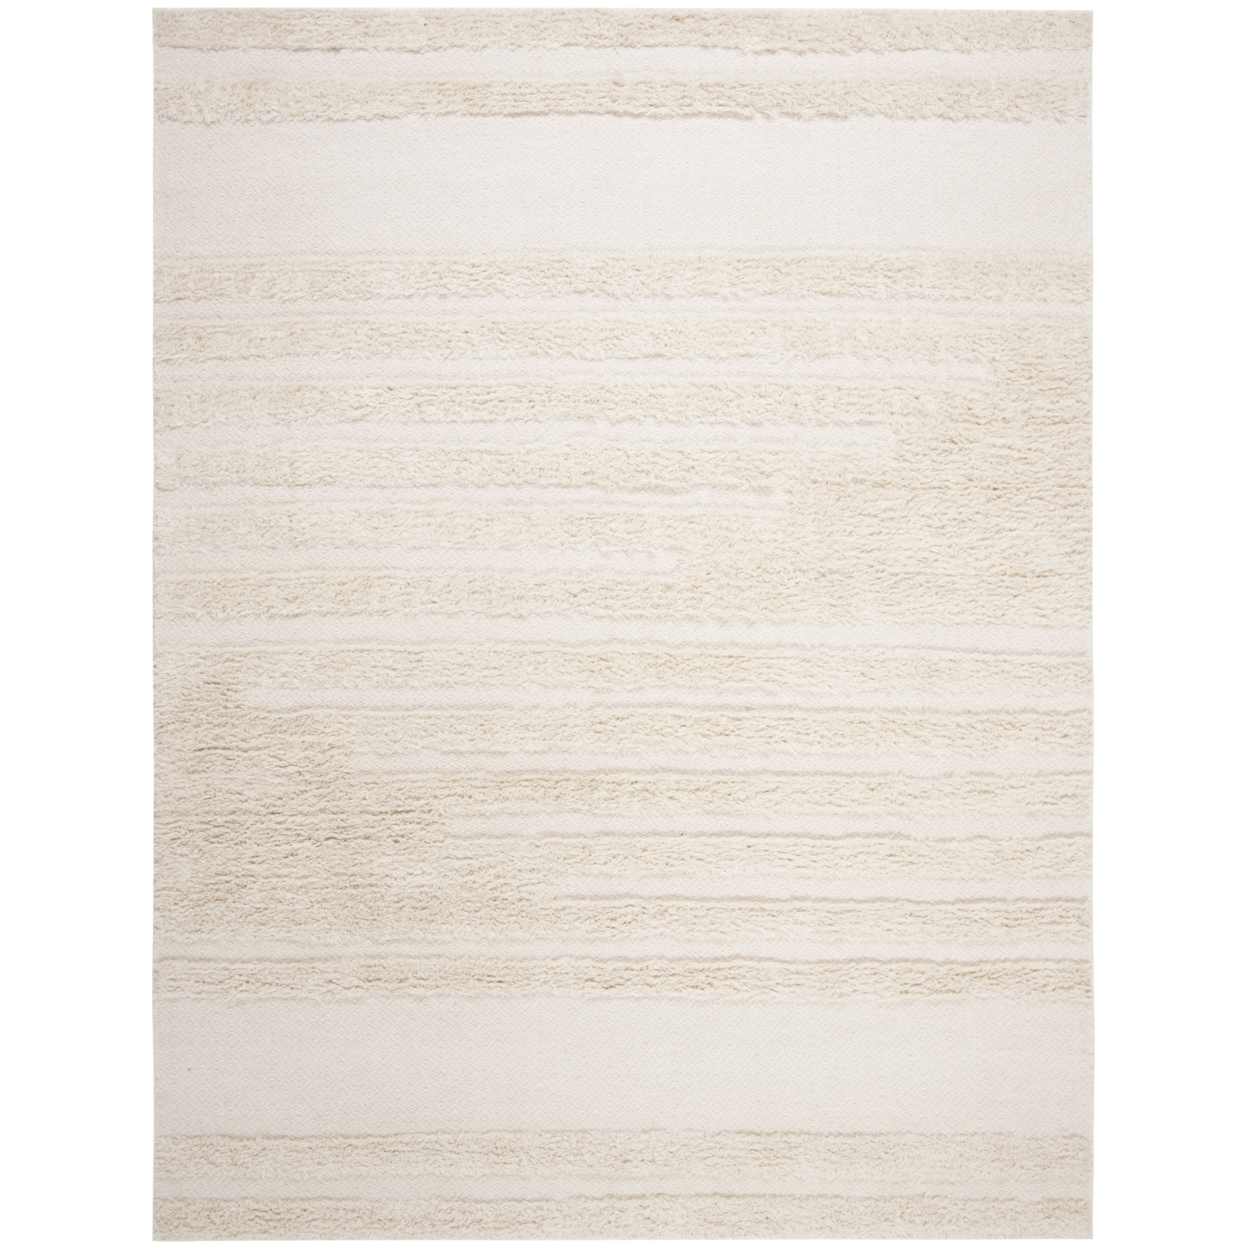 SAFAVIEH Kenya Collection KNY951A Hand-knotted Ivory Rug - 9' X 12'